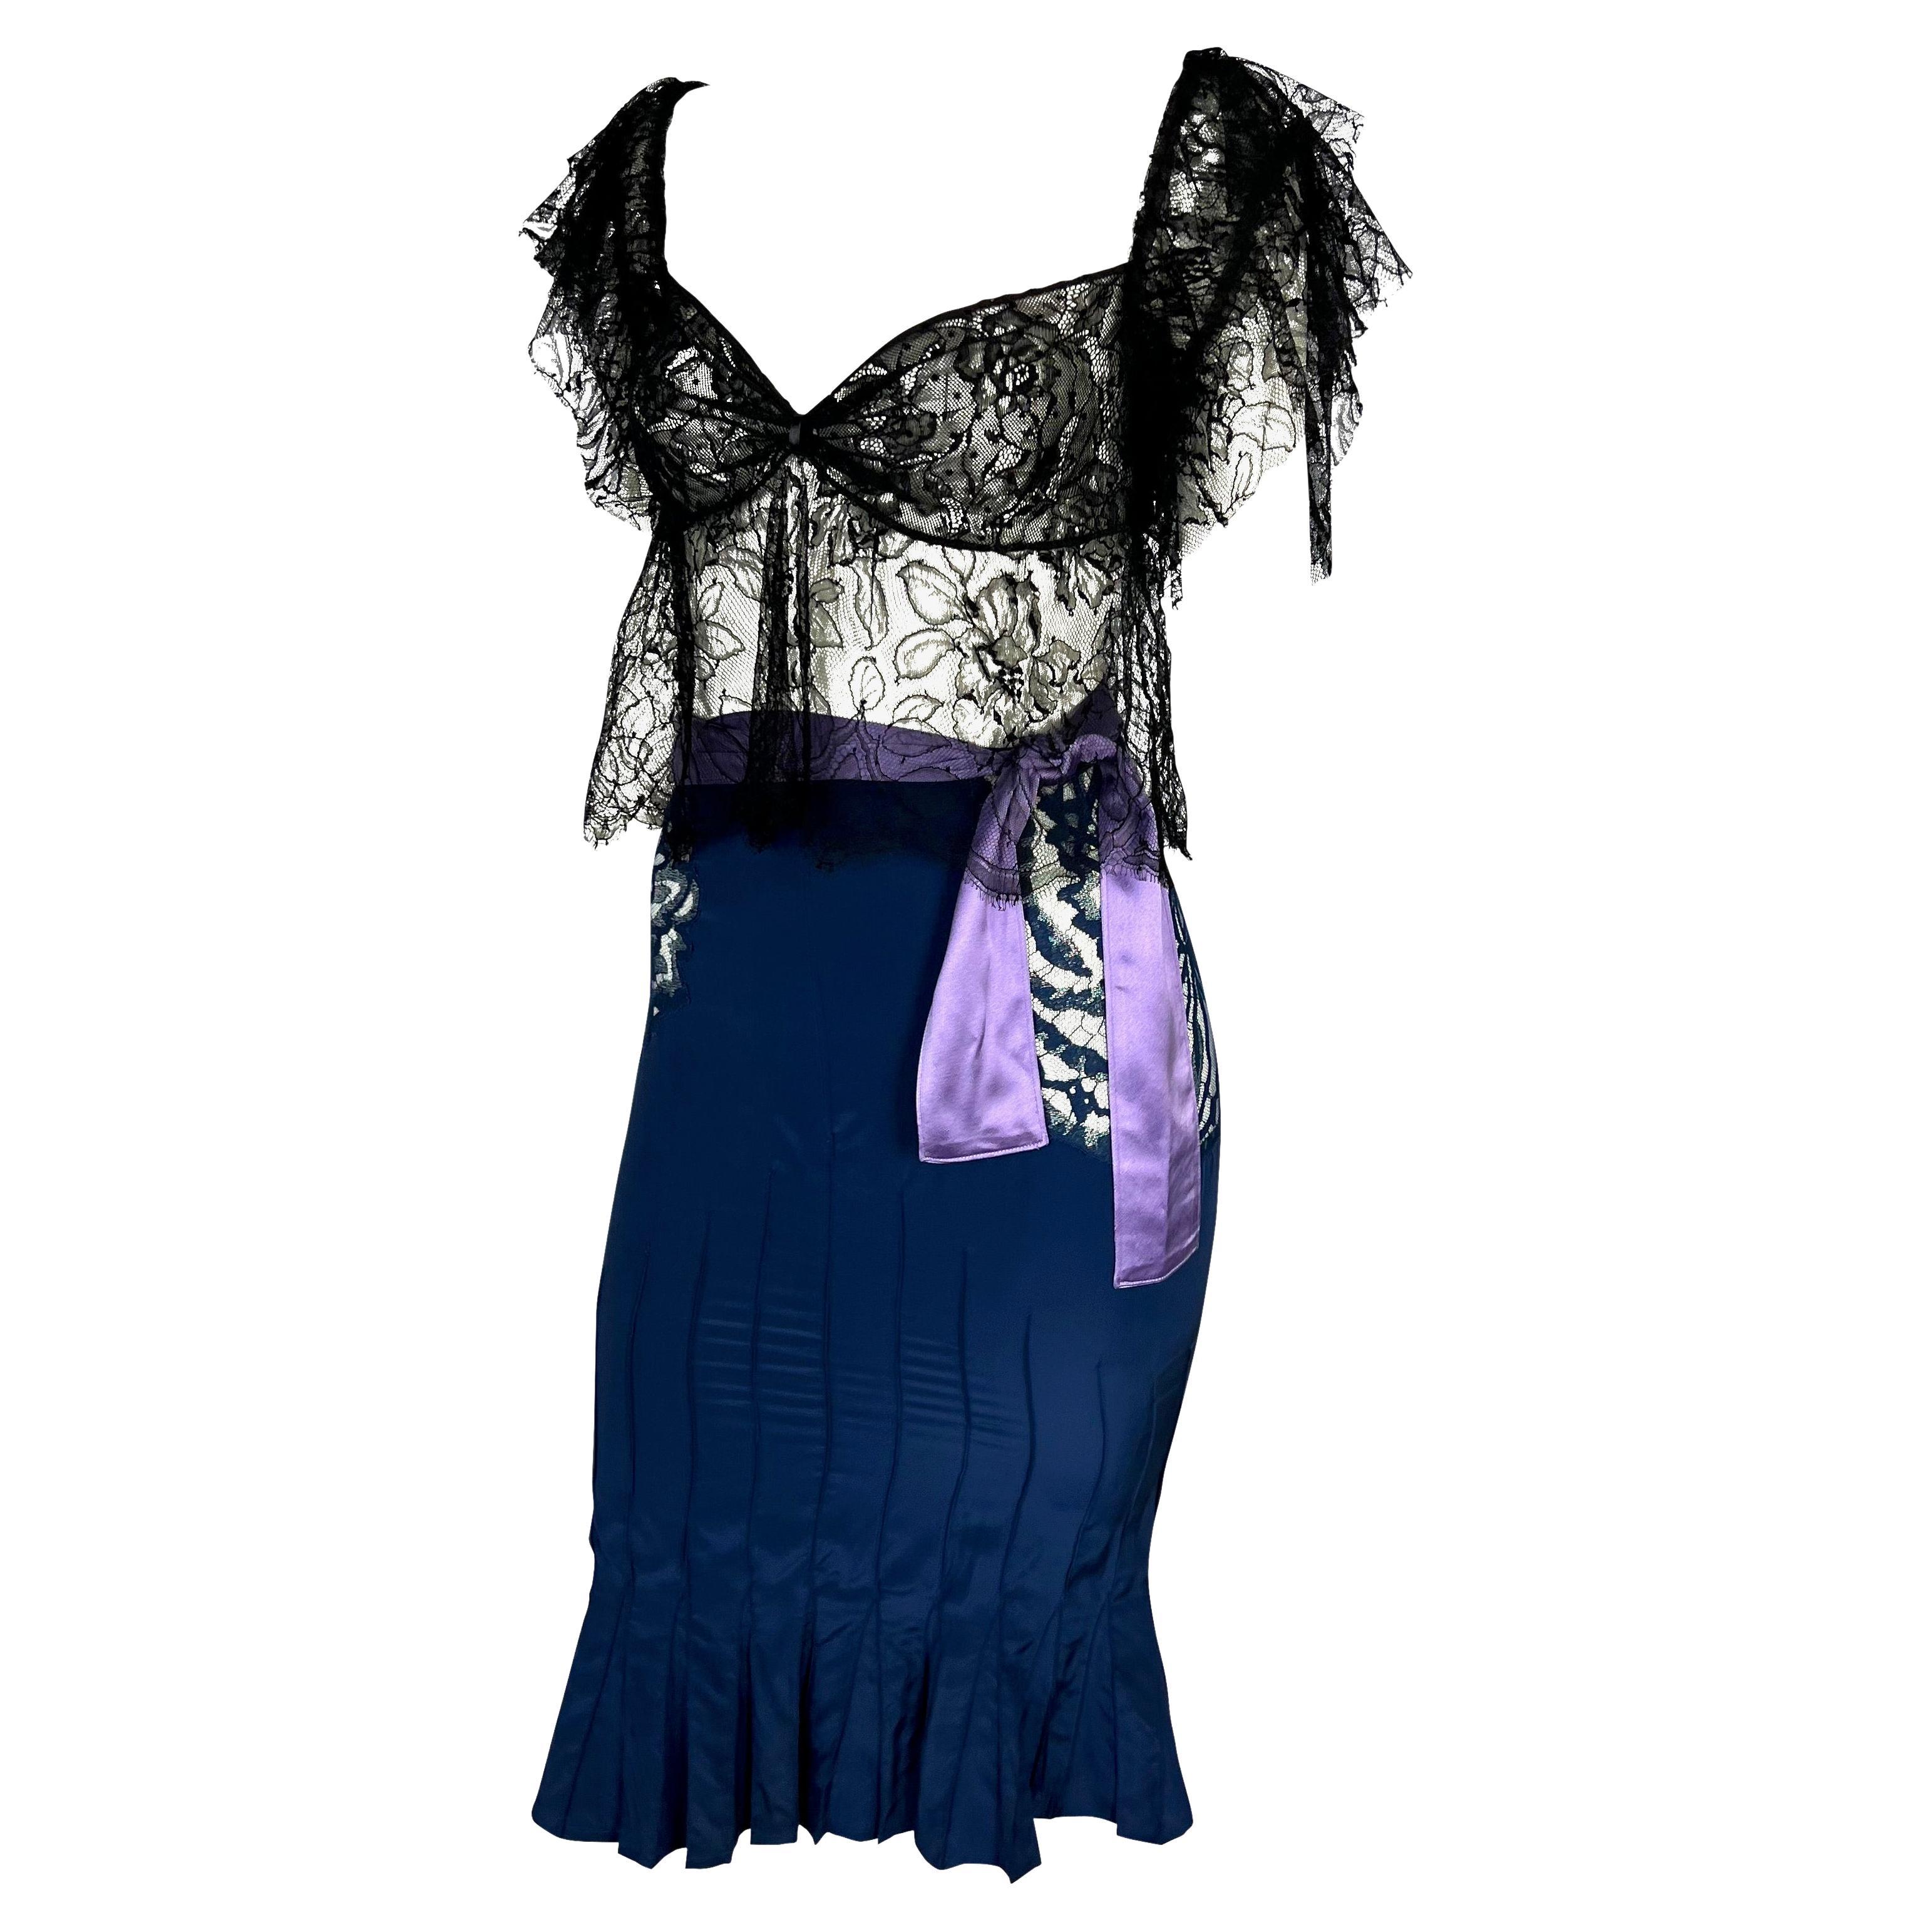 F/W 2003 Yves Saint Laurent by Tom Ford Runway Purple Satin Sheer Lace Skirt Set In Good Condition For Sale In West Hollywood, CA